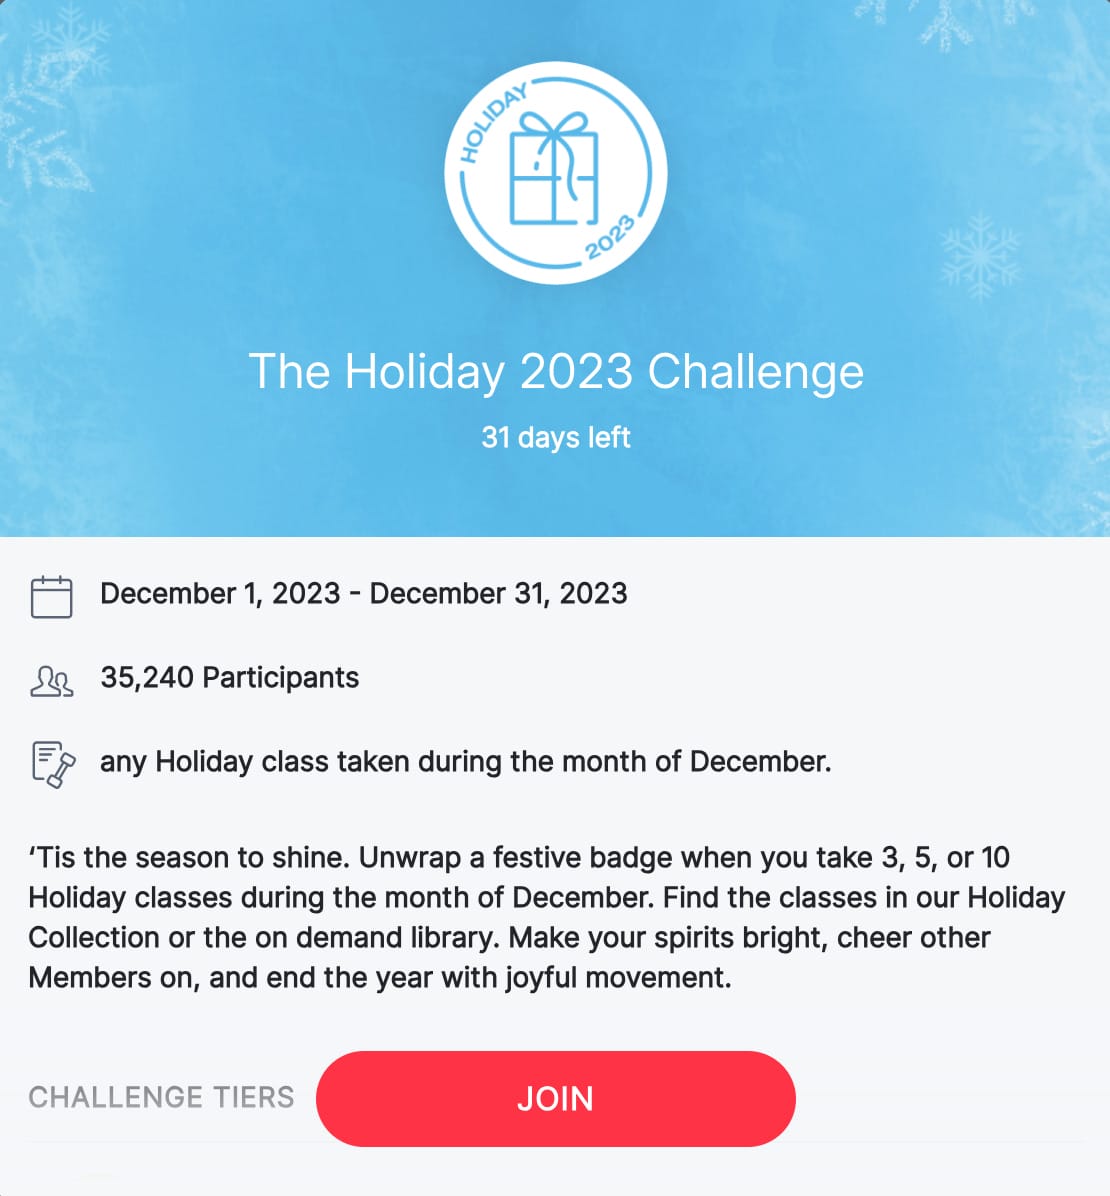 The Holiday 2023 Challenge